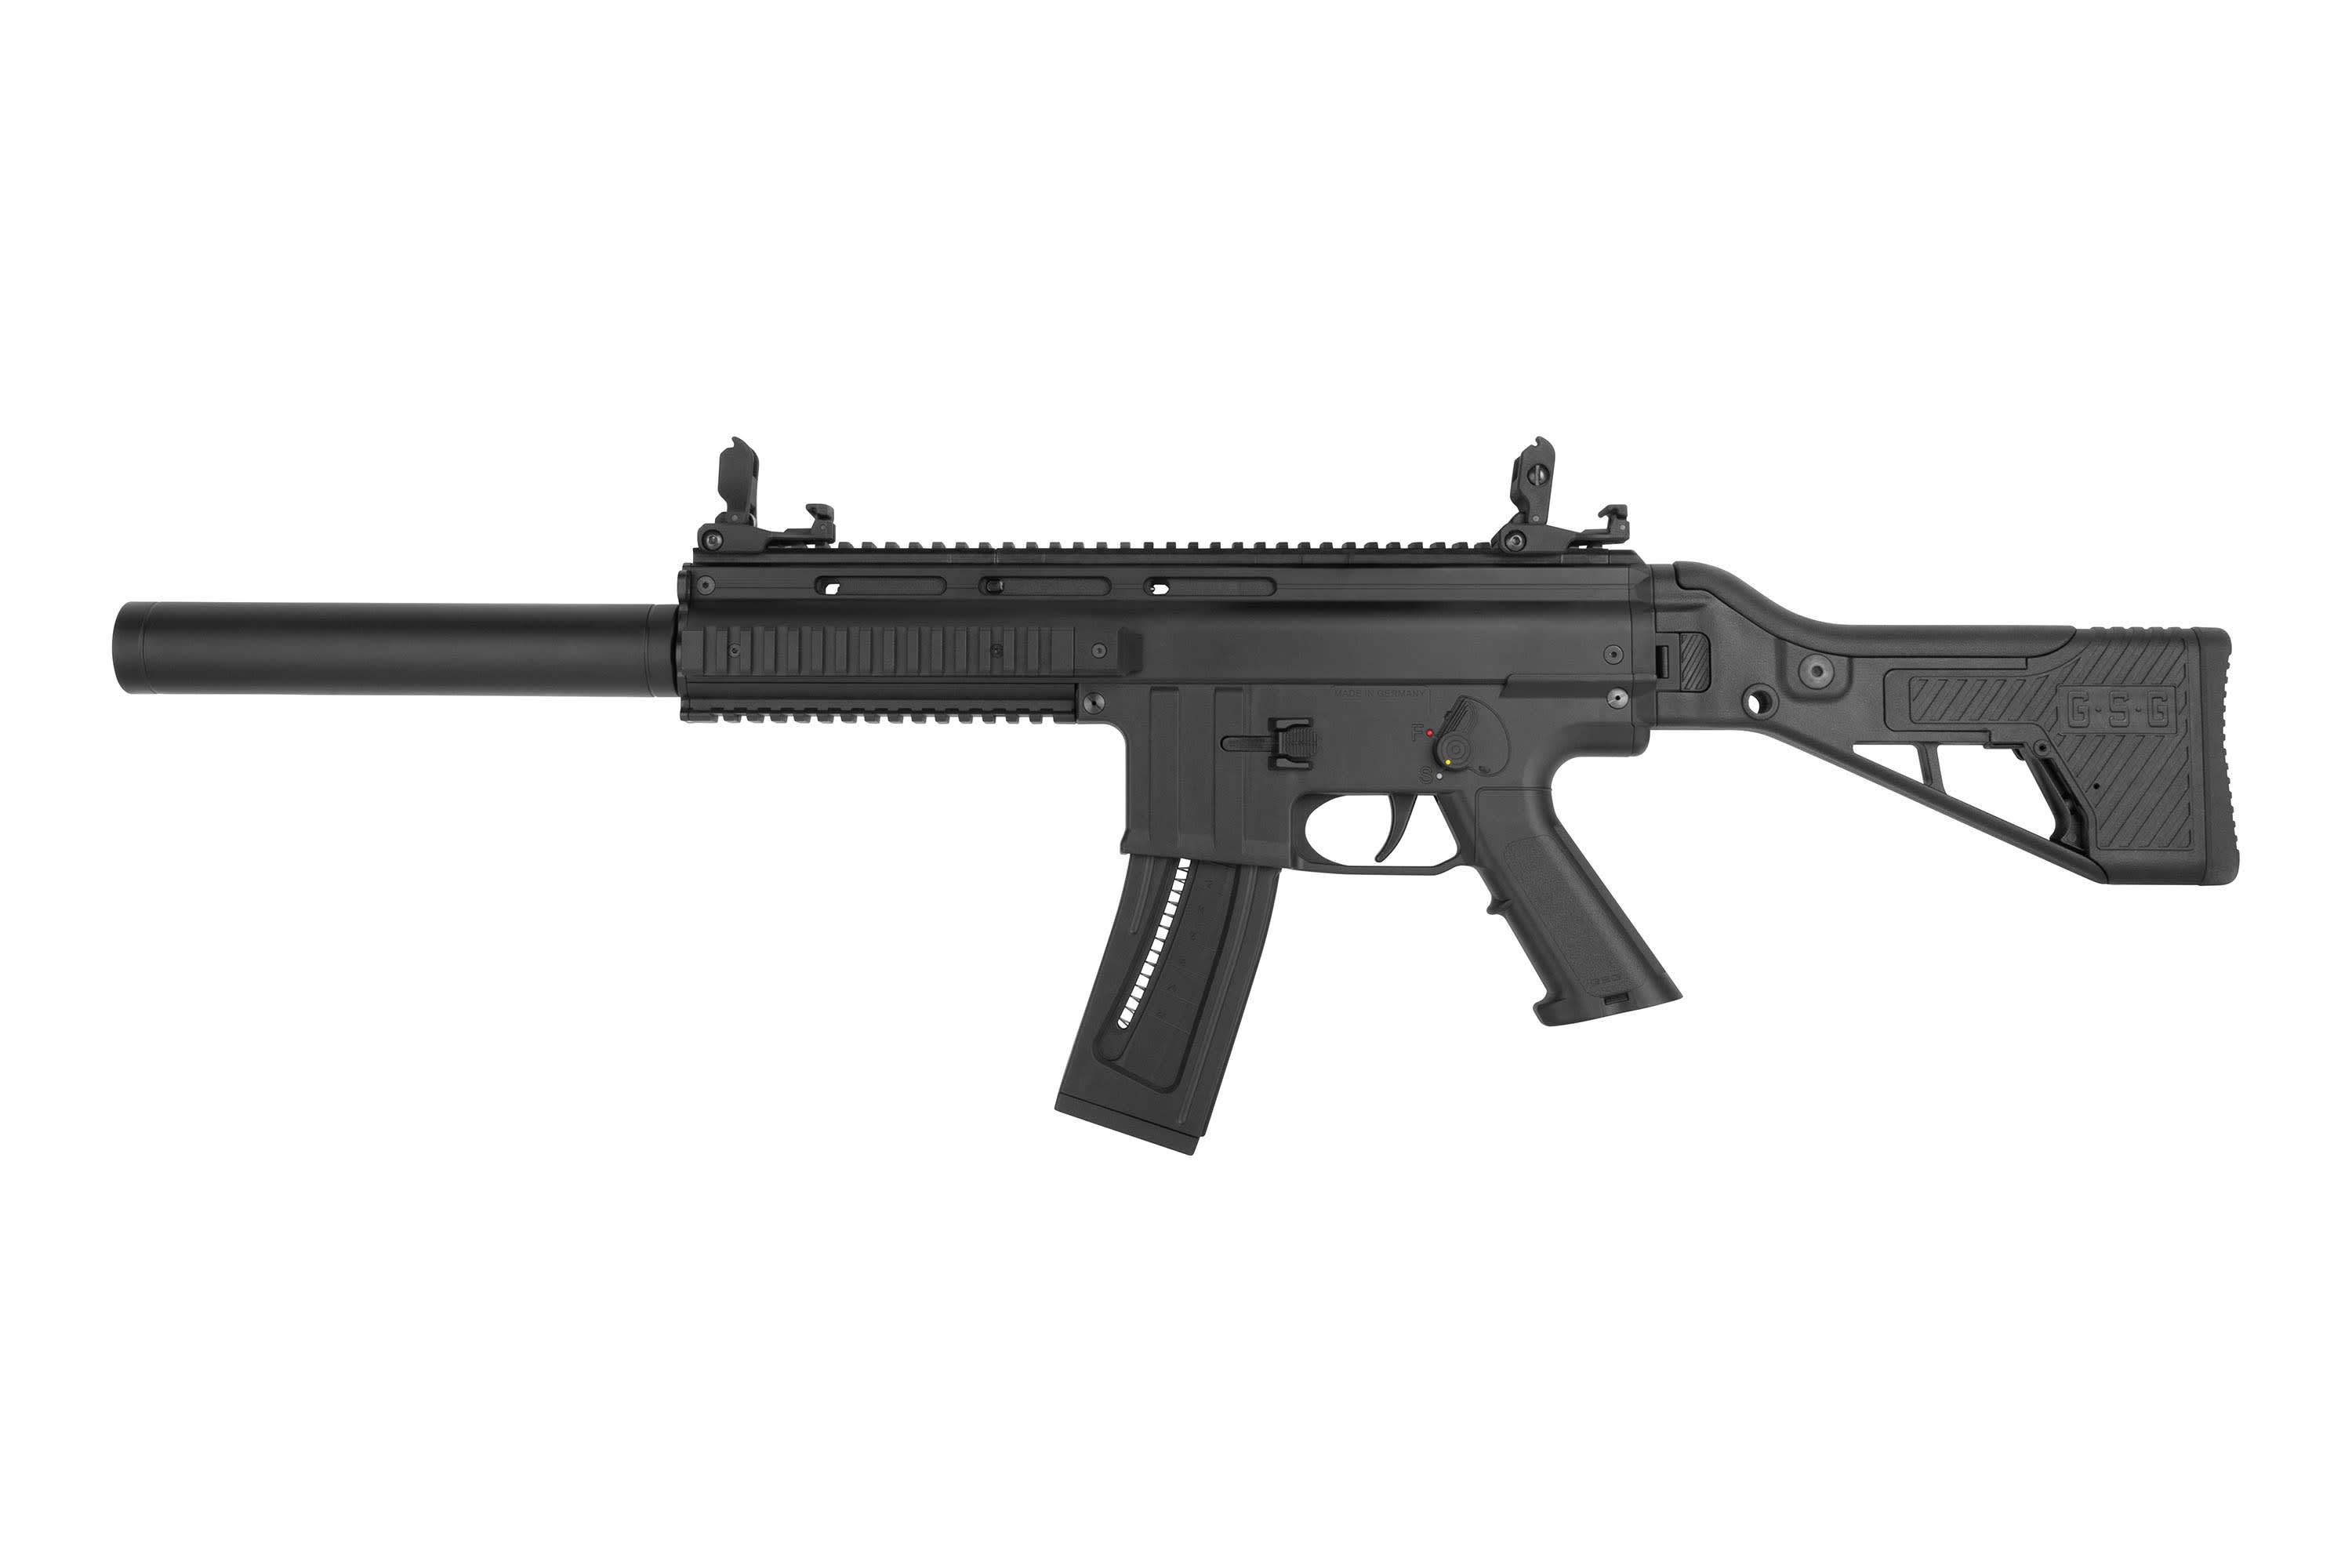 Special Edition GSG-15 Semi-Automatic Rifle with Red Dot Sight